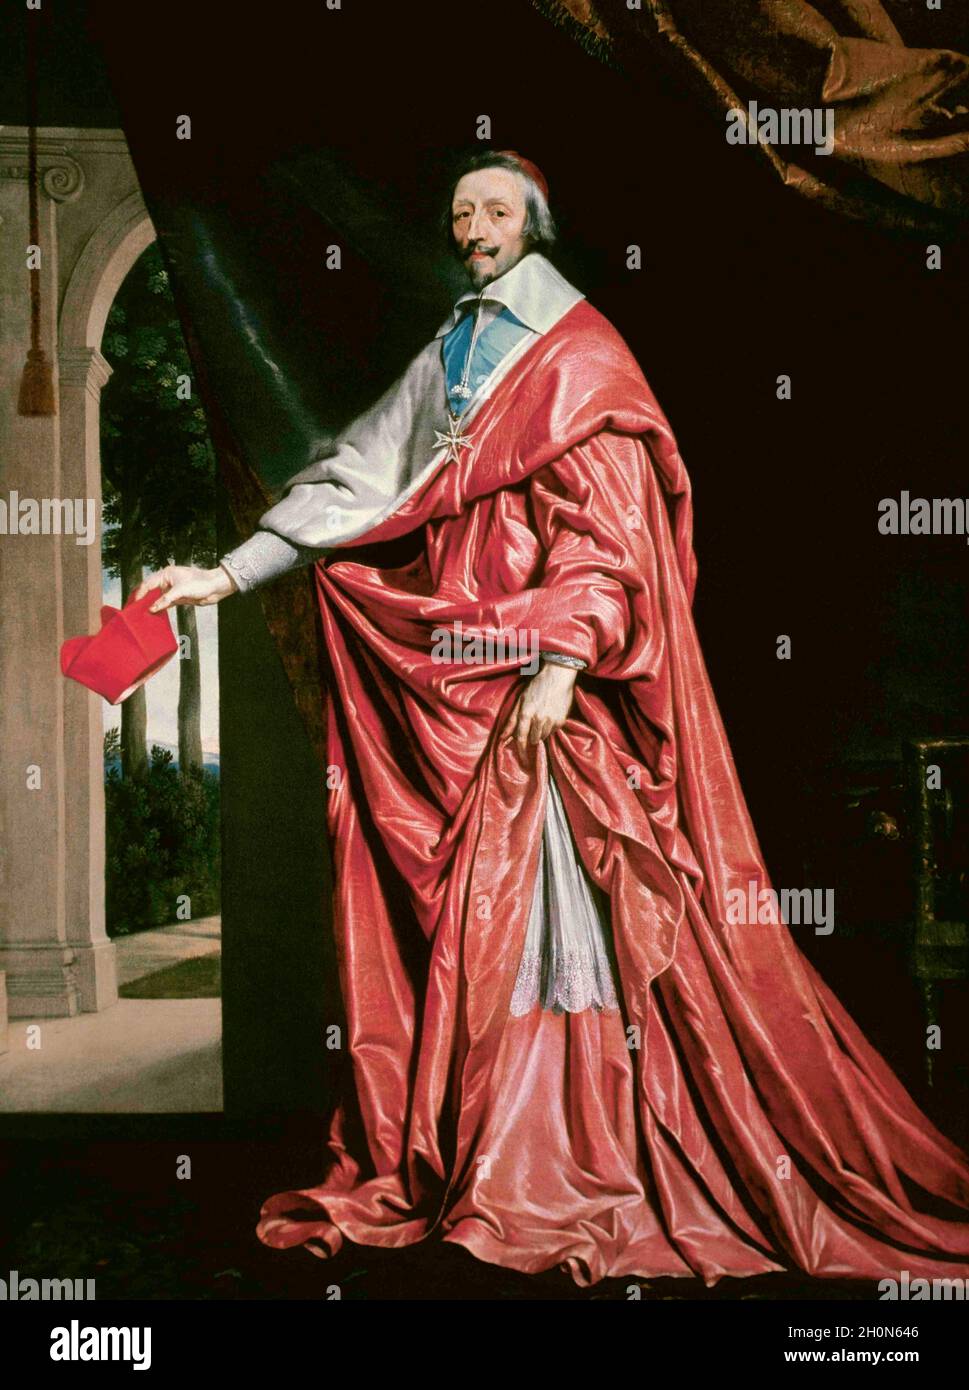 Cardinal Armand Jean du Plessis (1585-1642) known as Cardinal de  Richelieu. French clergyman and statesman. He was chief minister of King Louis XIII. Stock Photo